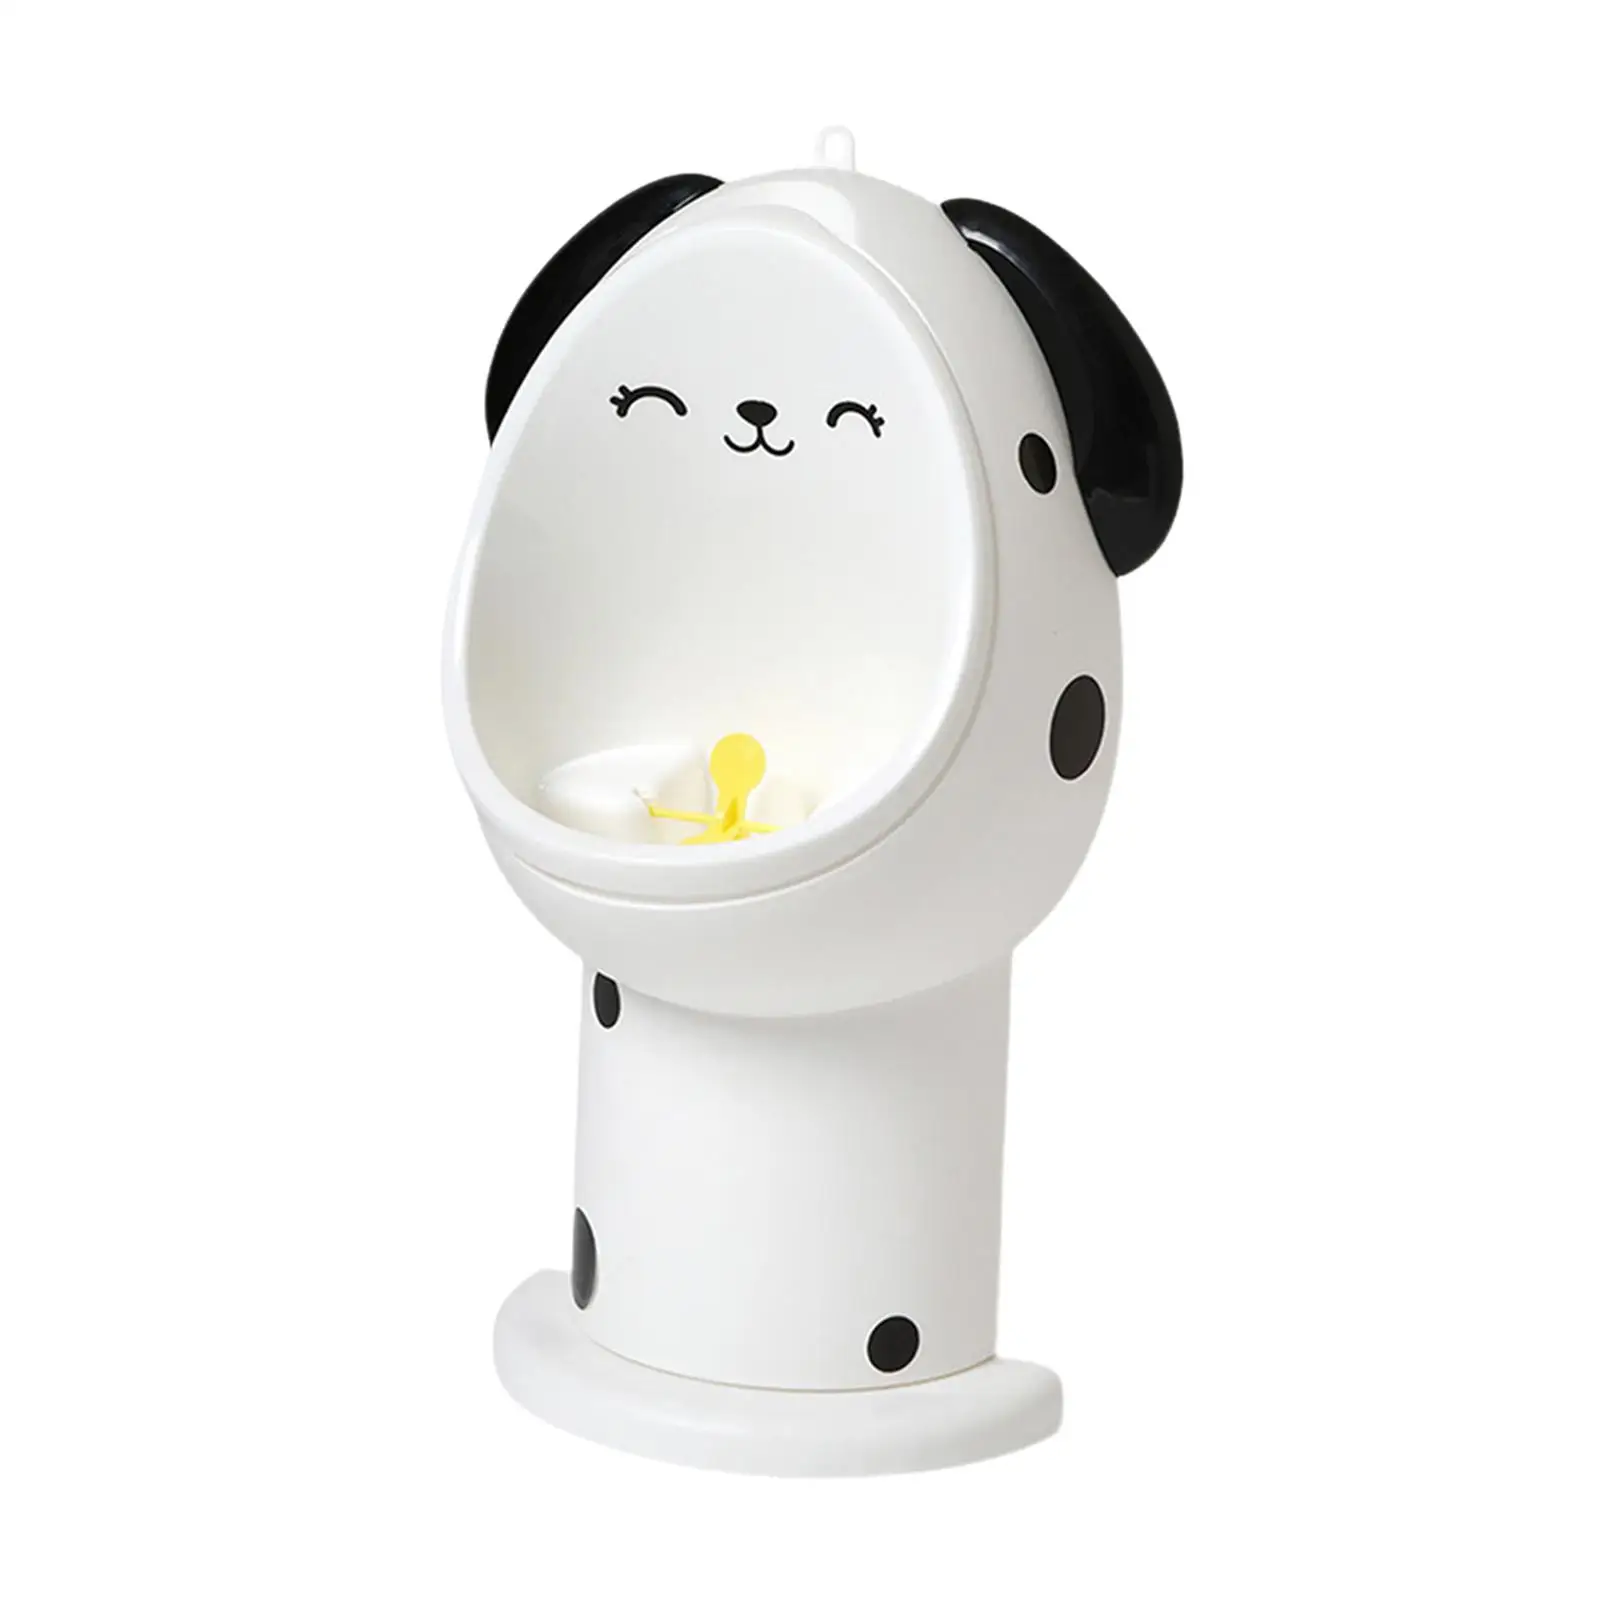 Toddler Pee Trainer Potty Urinal Toilet Boy Standing Urinal for Bathroom Adjustable Height 3 Levels Sturdy Split Designed Cute